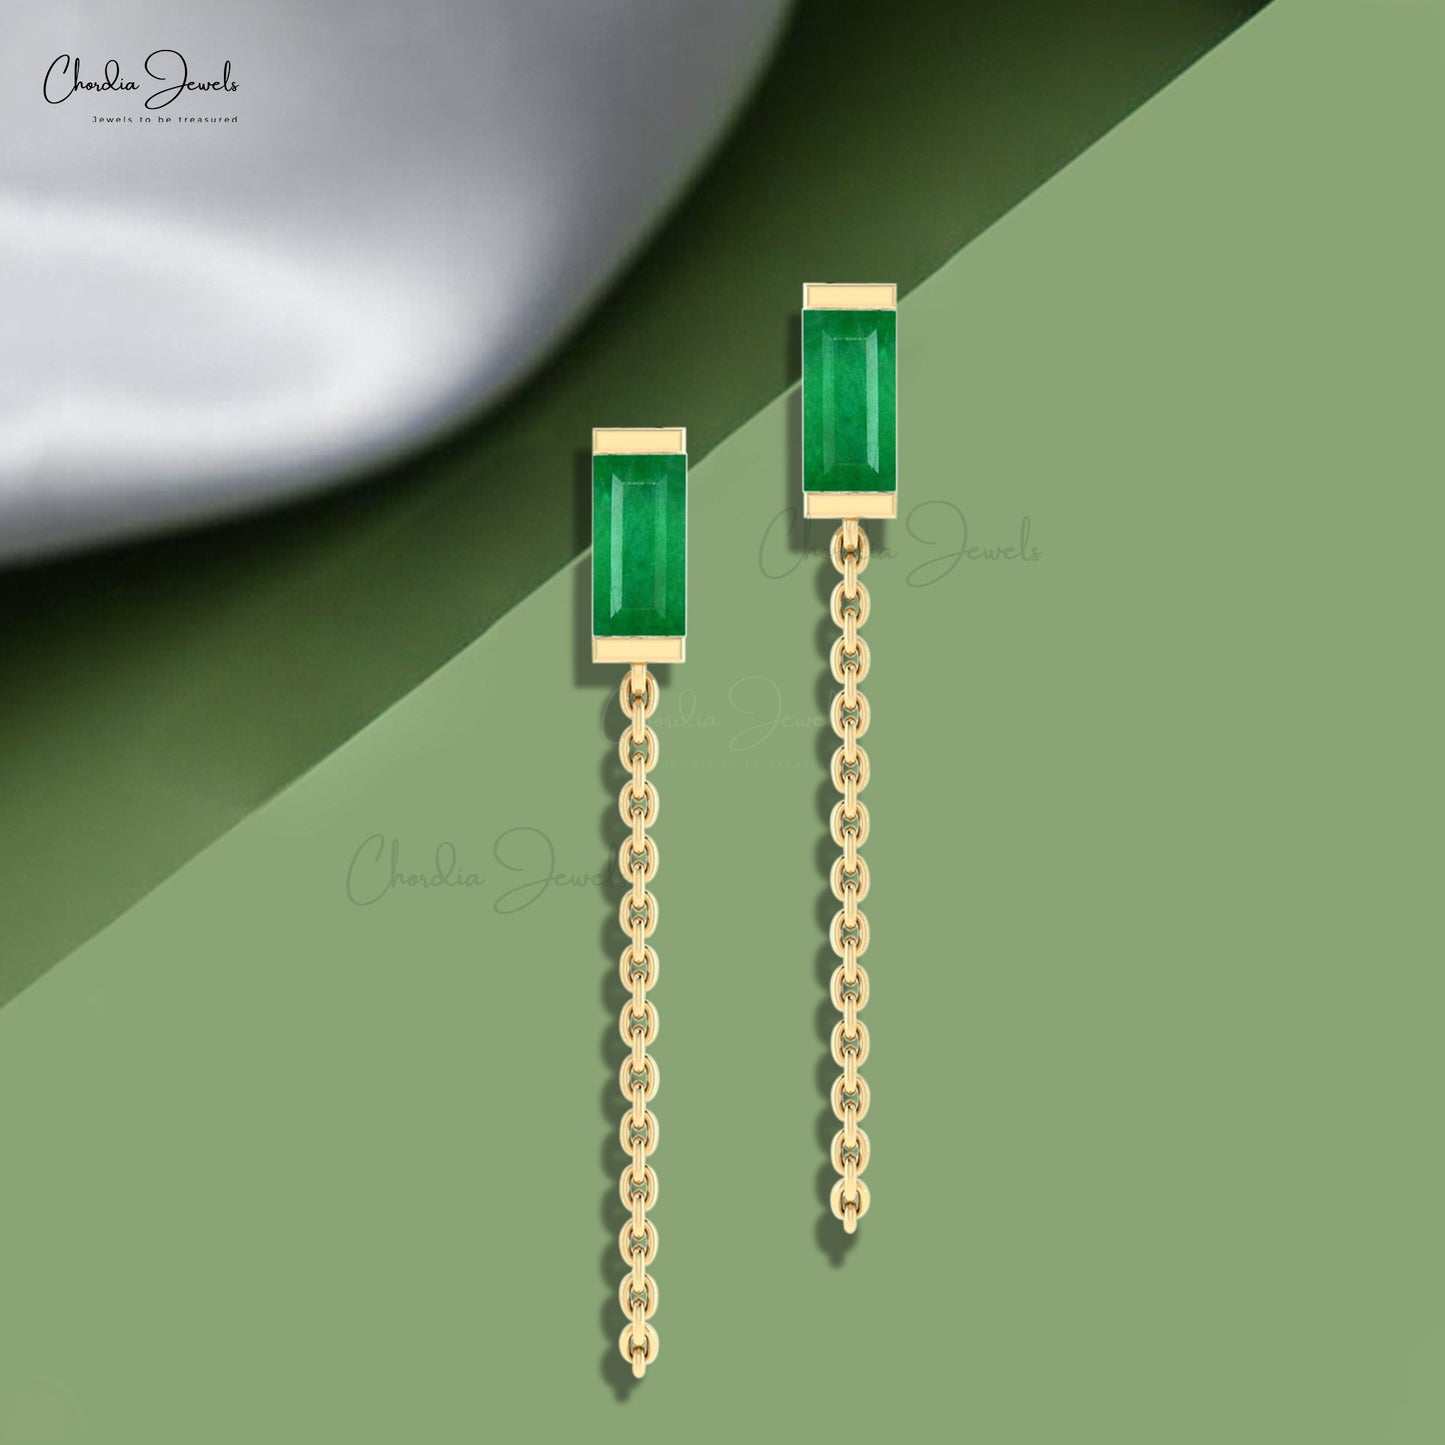 Indulge in sophistication of the real emerald green earrings.